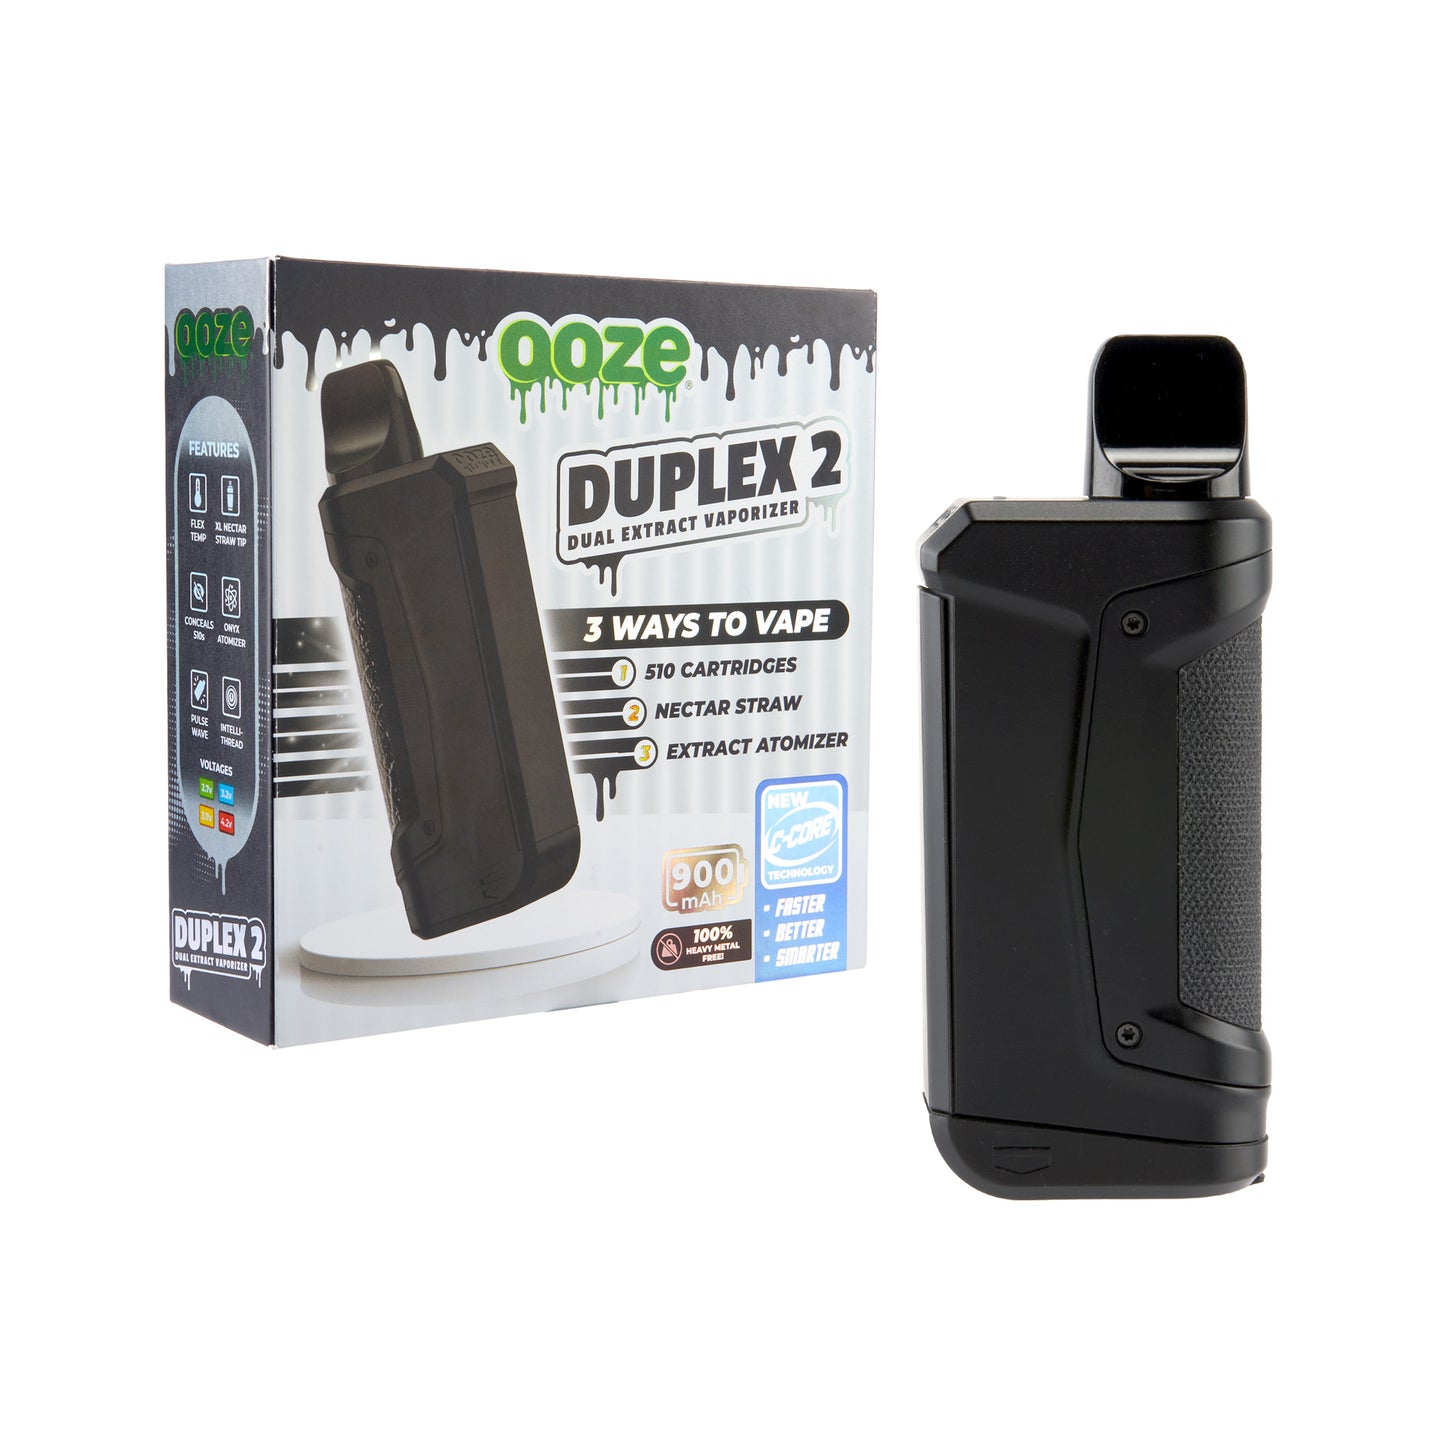 The panther black Ooze Duplex 2 extract vaporizer is shown next to the box